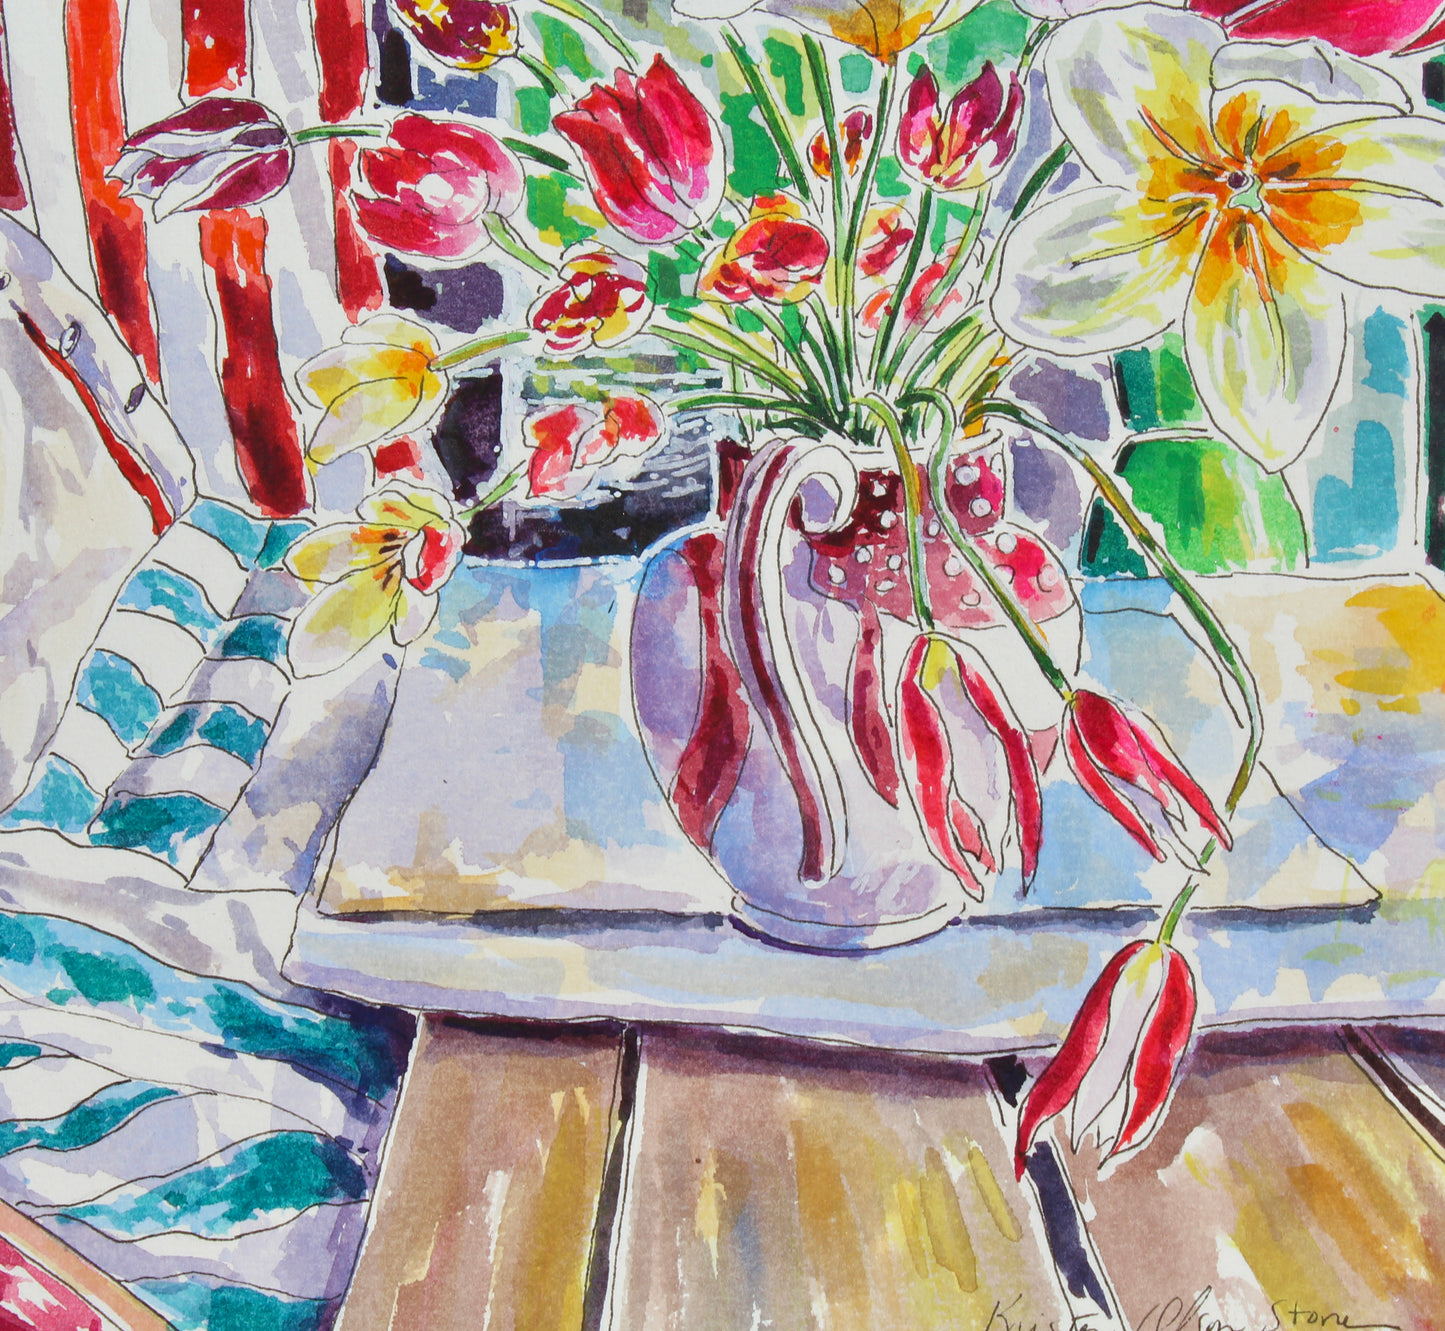 Summer Celebration, An Original Watercolor And Ink Painting Of Flowers, Union Jack And Red And White Striped Fabric